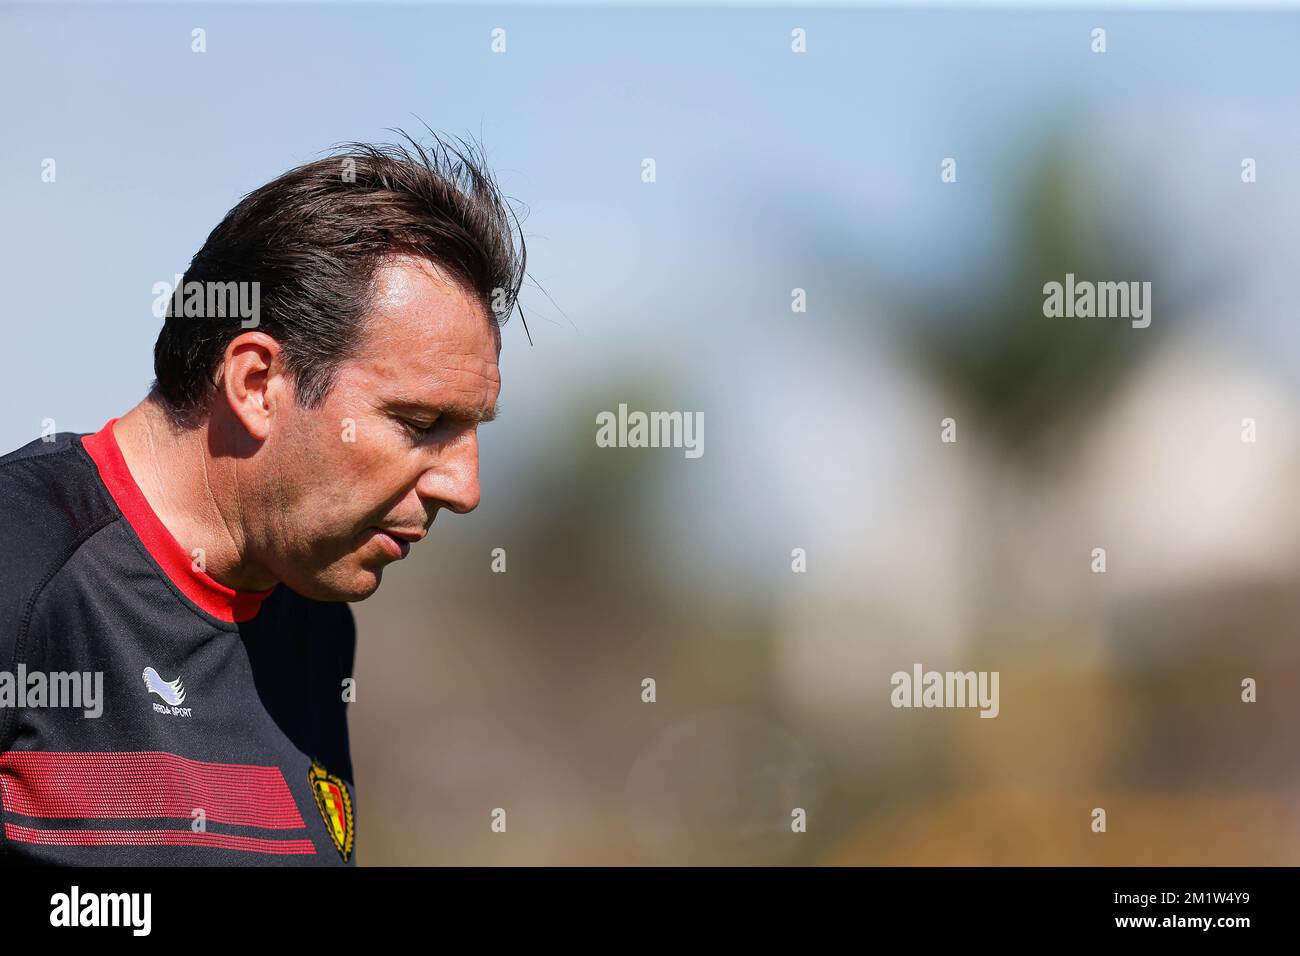 Belgium's head coach Marc Wilmots pictured during a training session of Belgian national soccer team Red Devils in their hotel resort in Mogi das Cruzes, near Sao Paulo, Brazil, before the start of the 2014 FIFA World Cup, Friday 13 June 2014.  Stock Photo